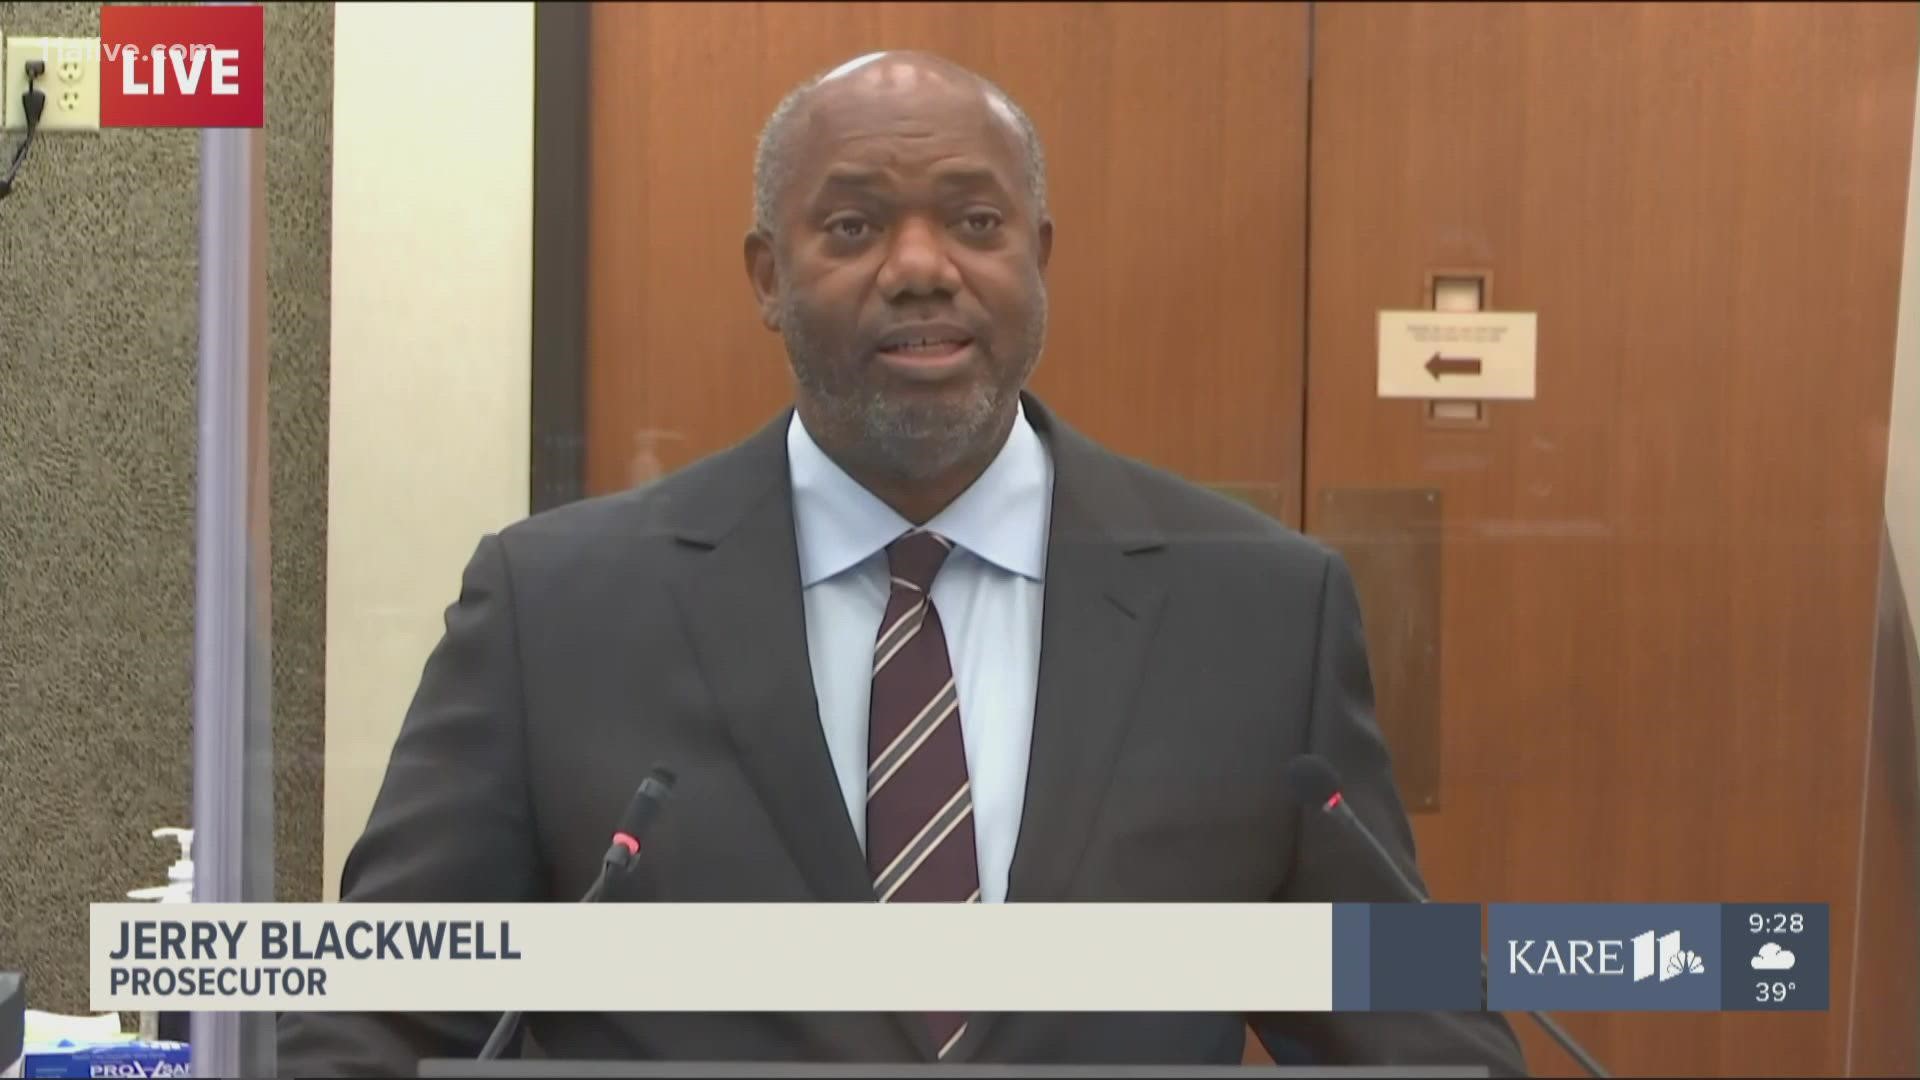 The prosecution argues that Dr. Fowler raised a new opinion from the witness stand about a study that wasn't disclosed in their pre-trial reports.